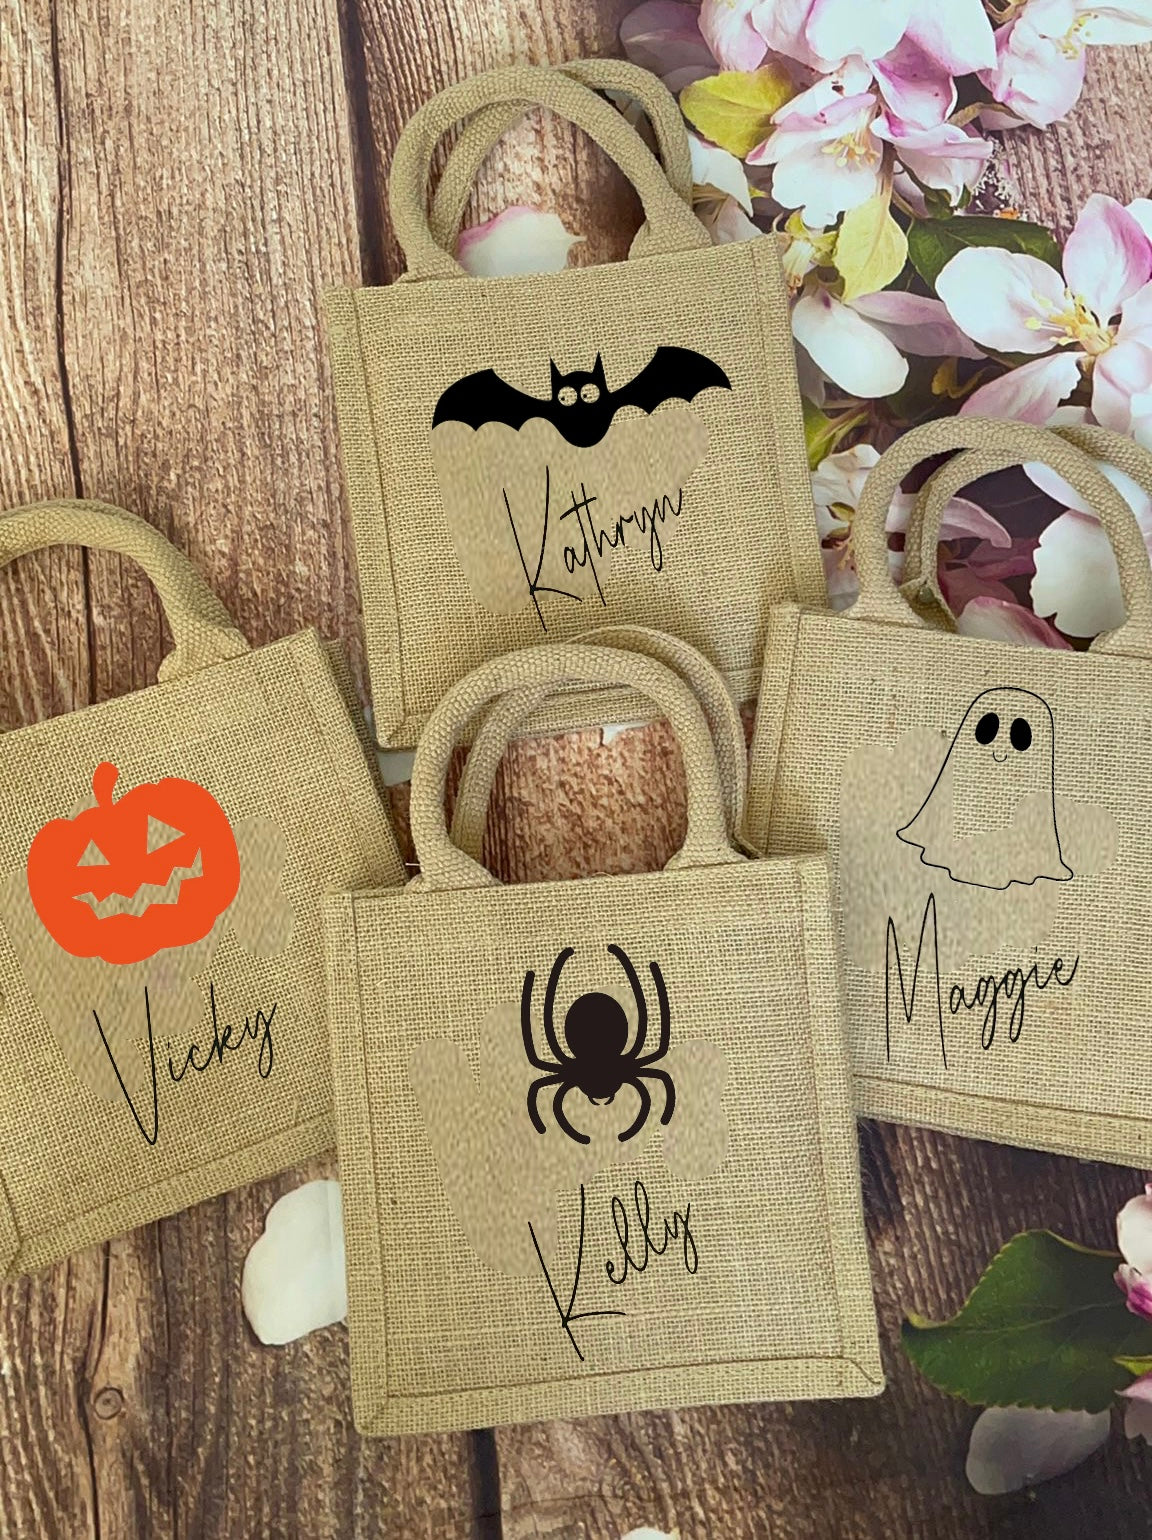 Halloween trick or treat bags personalised with name. Hessian tote jute bag.